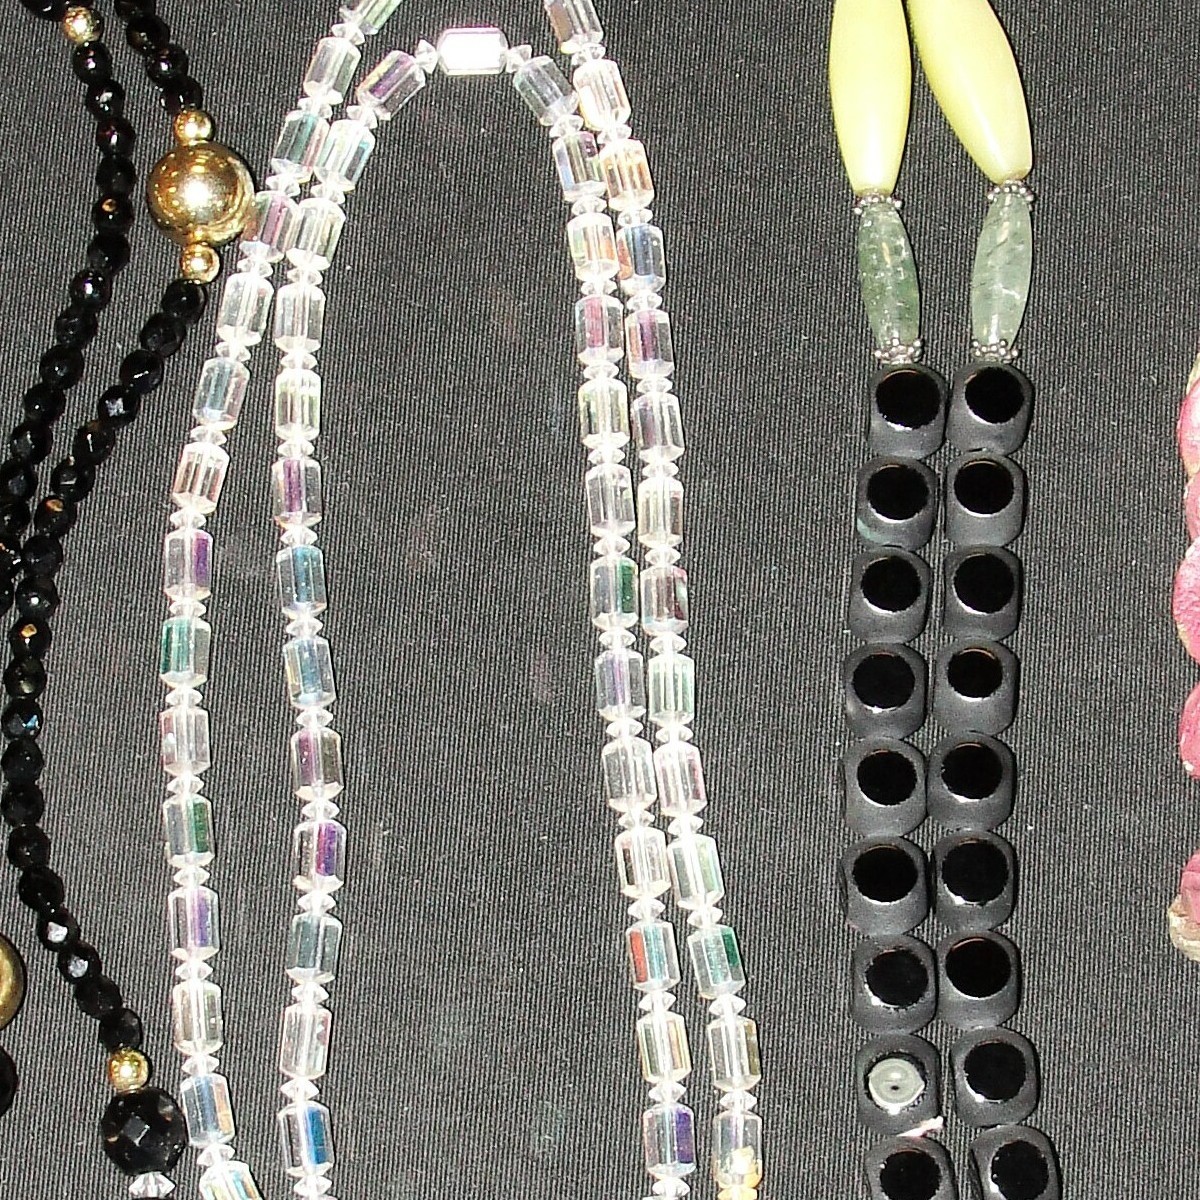 11 Piece Lot Of Costume Jewelry Necklaces.